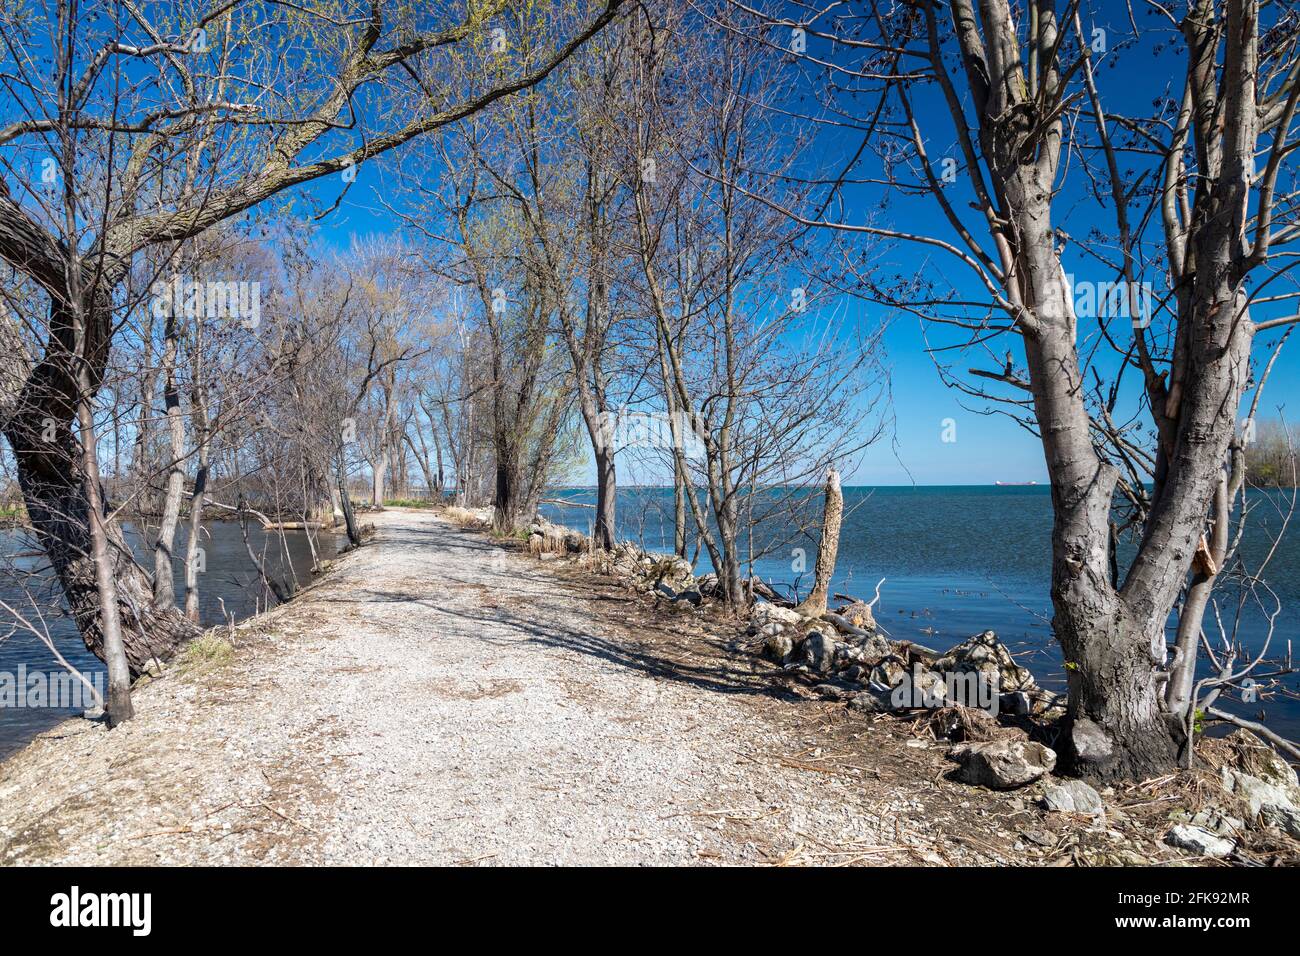 Rockwood, Michigan - A nature trail along the shore of Lake Erie in Lake Erie Metropark. Stock Photo